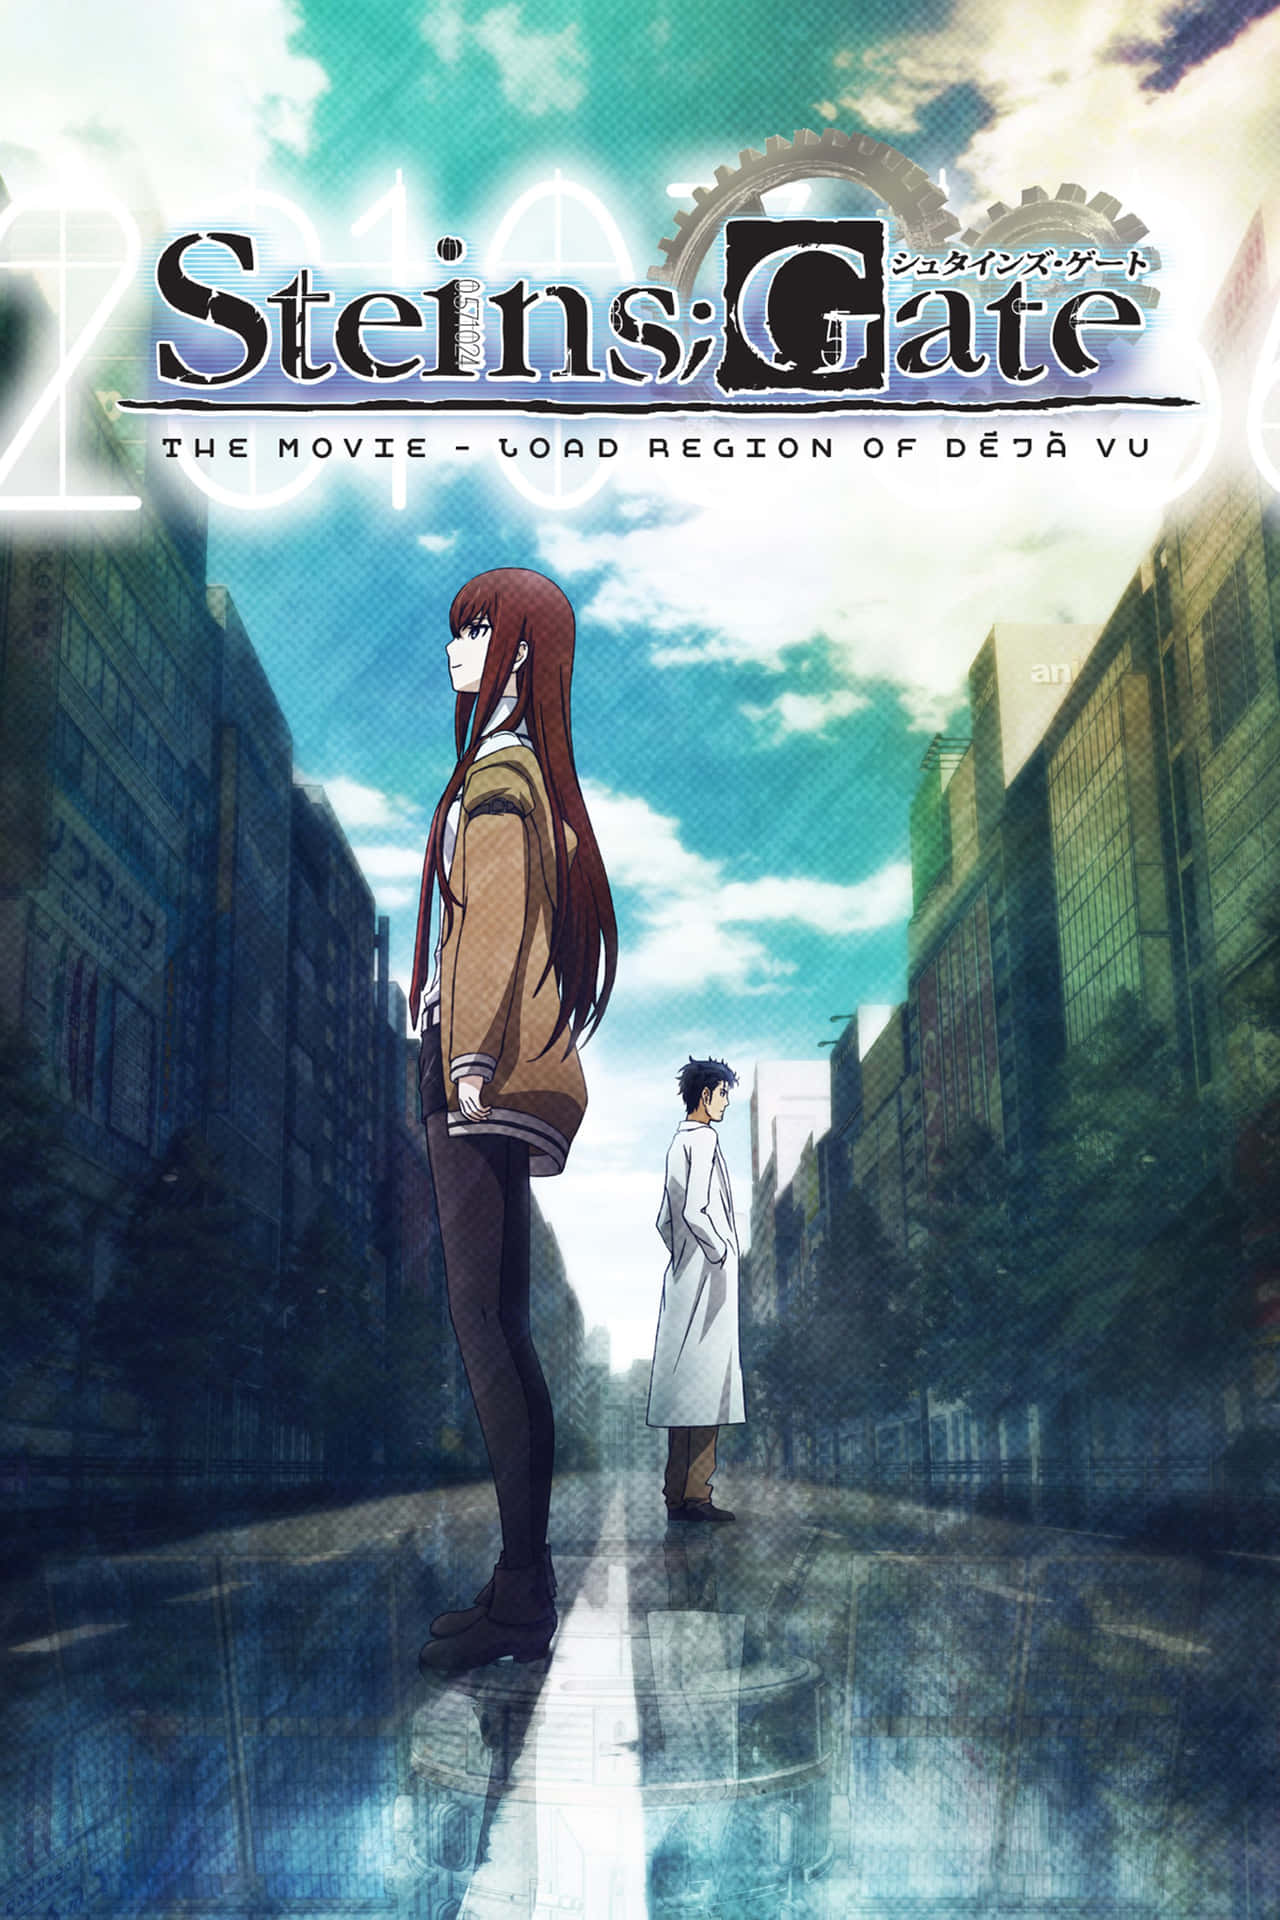 Enter "Steins Gate", a journey through time and space.